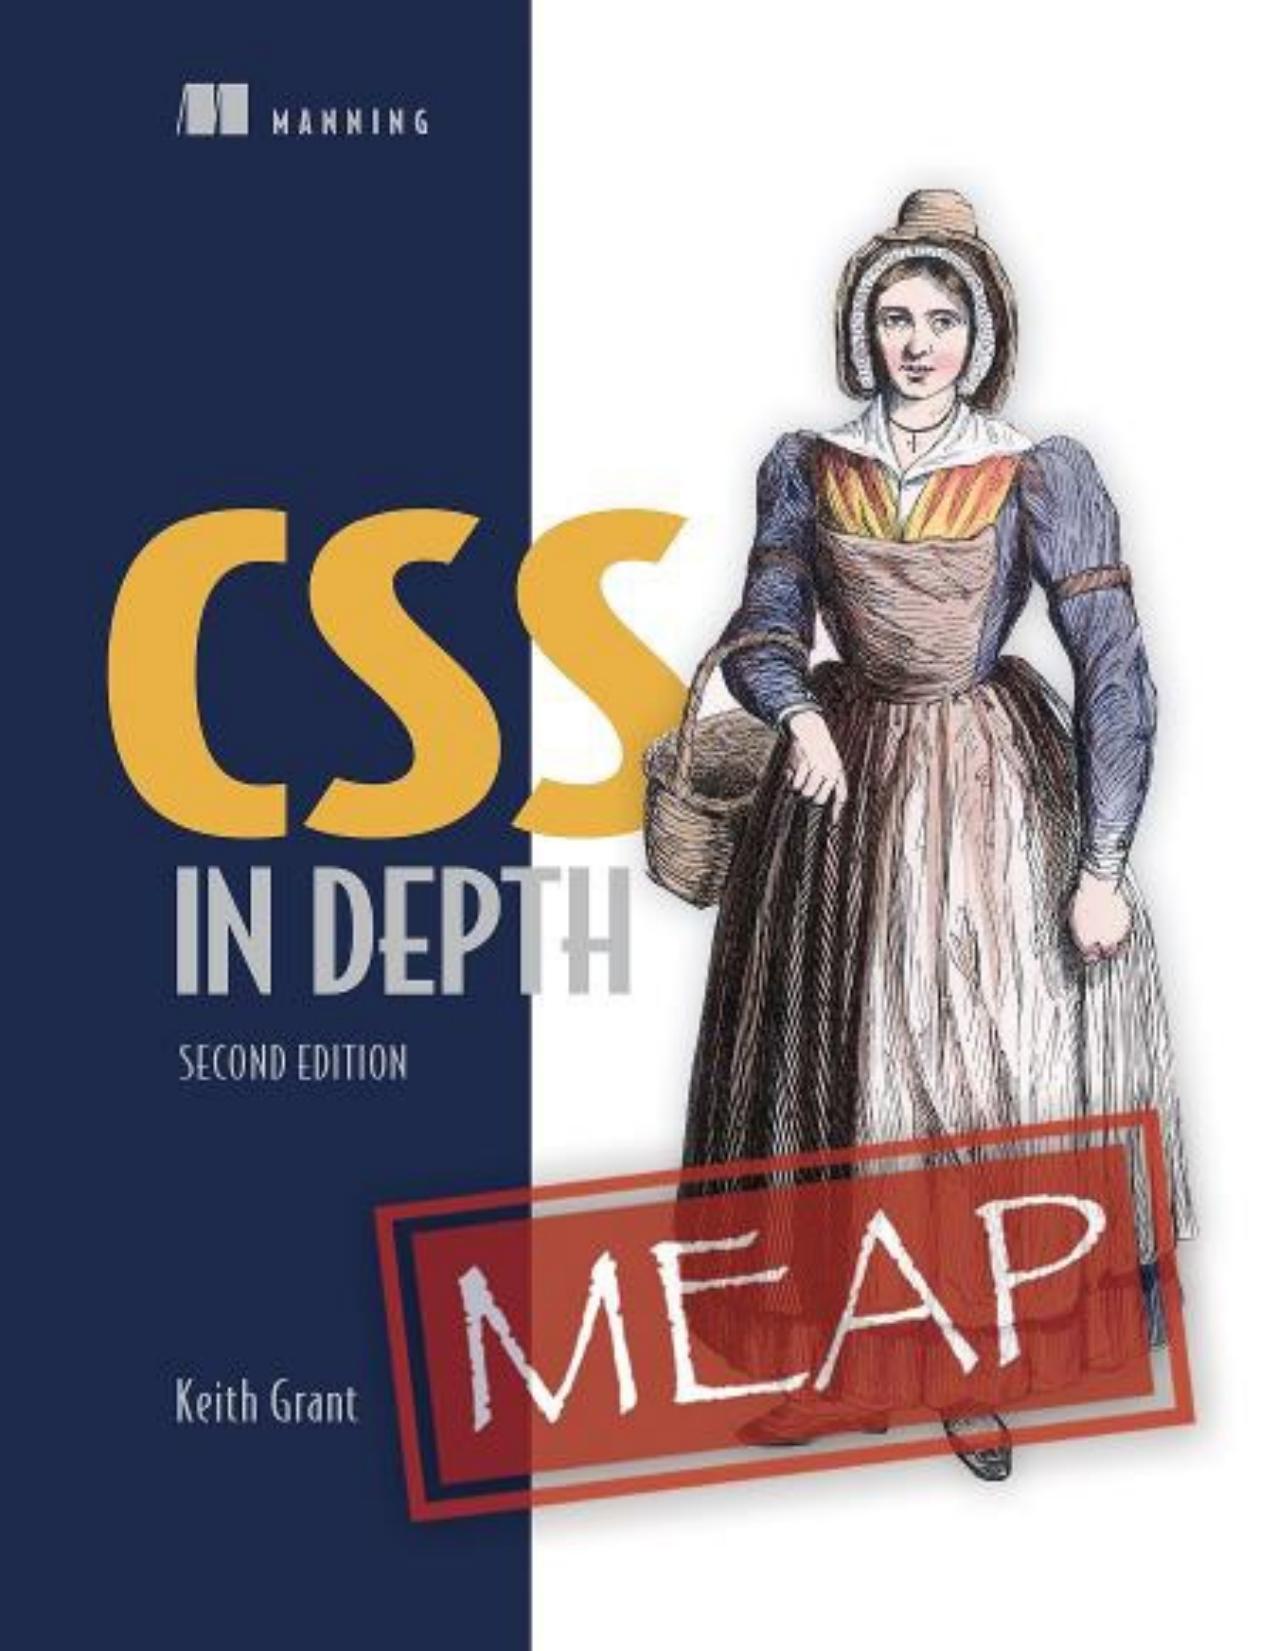 CSS in Depth, Second Edition (MEAP V01) by Keith Grant